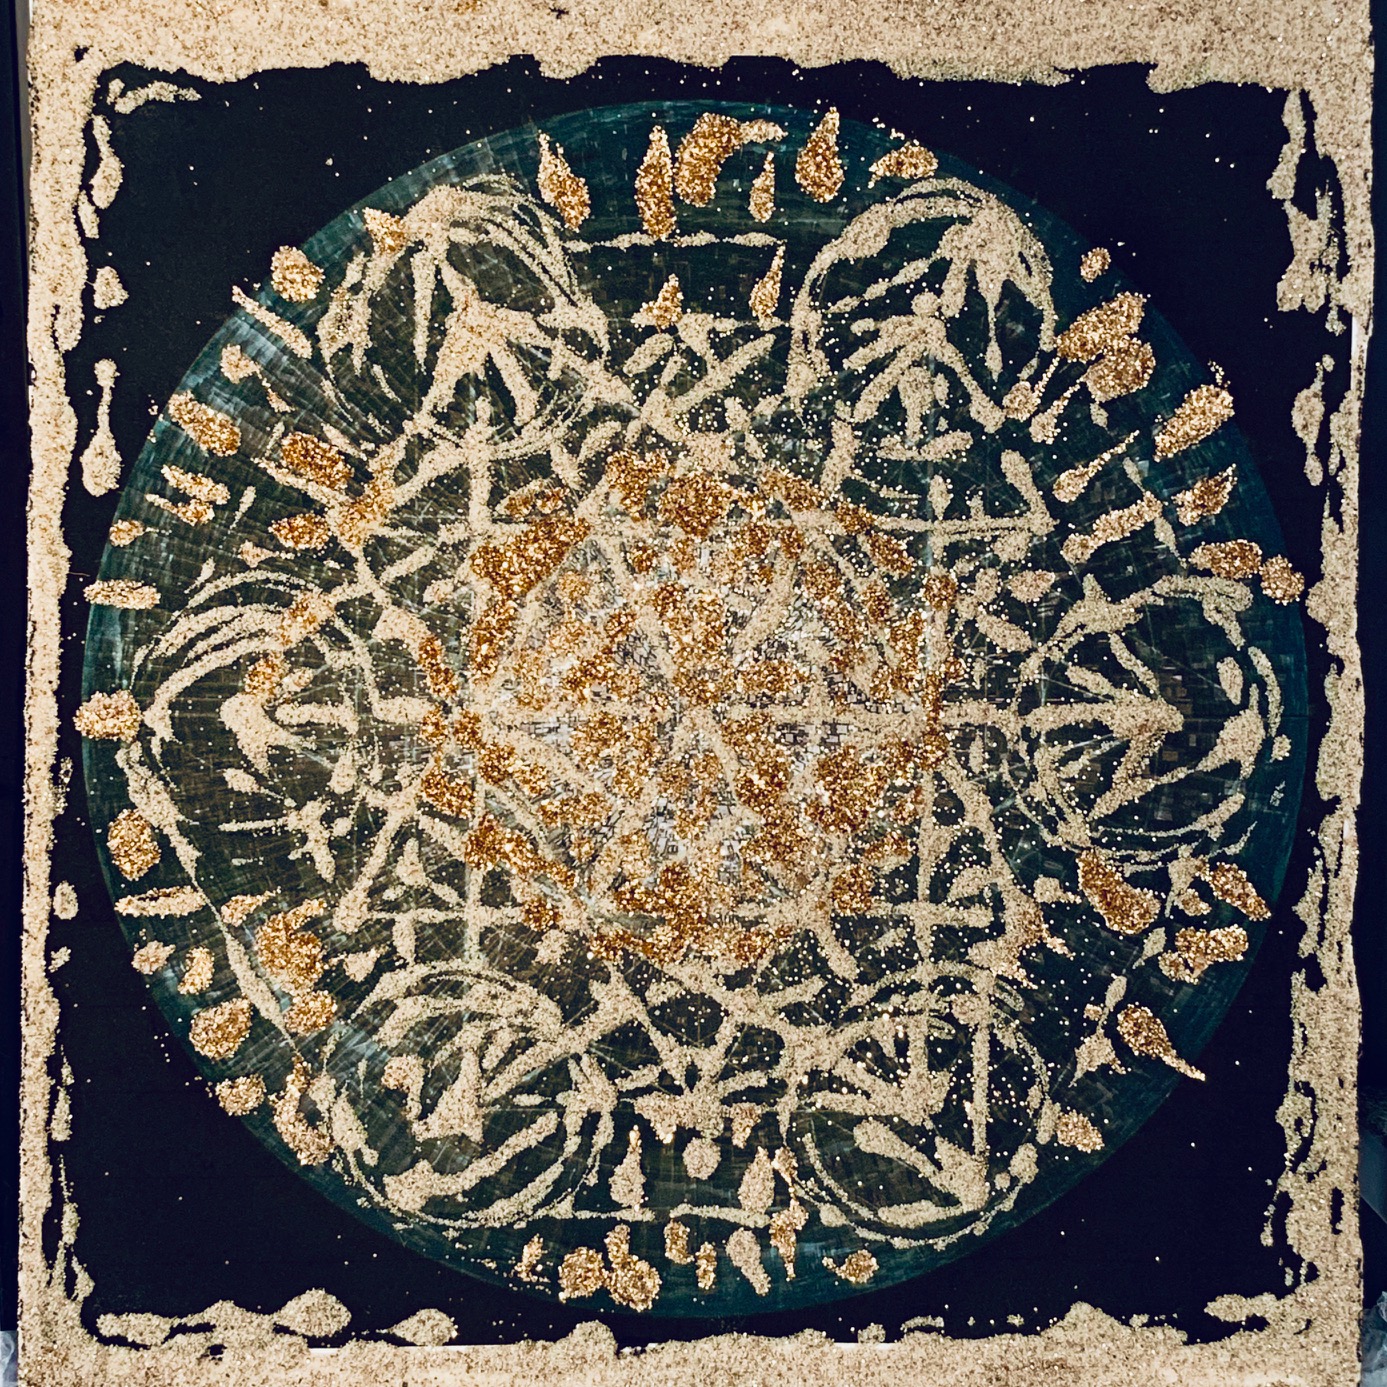 Mattai Metatron, sand and gold on paper, 15 x 11 in $850